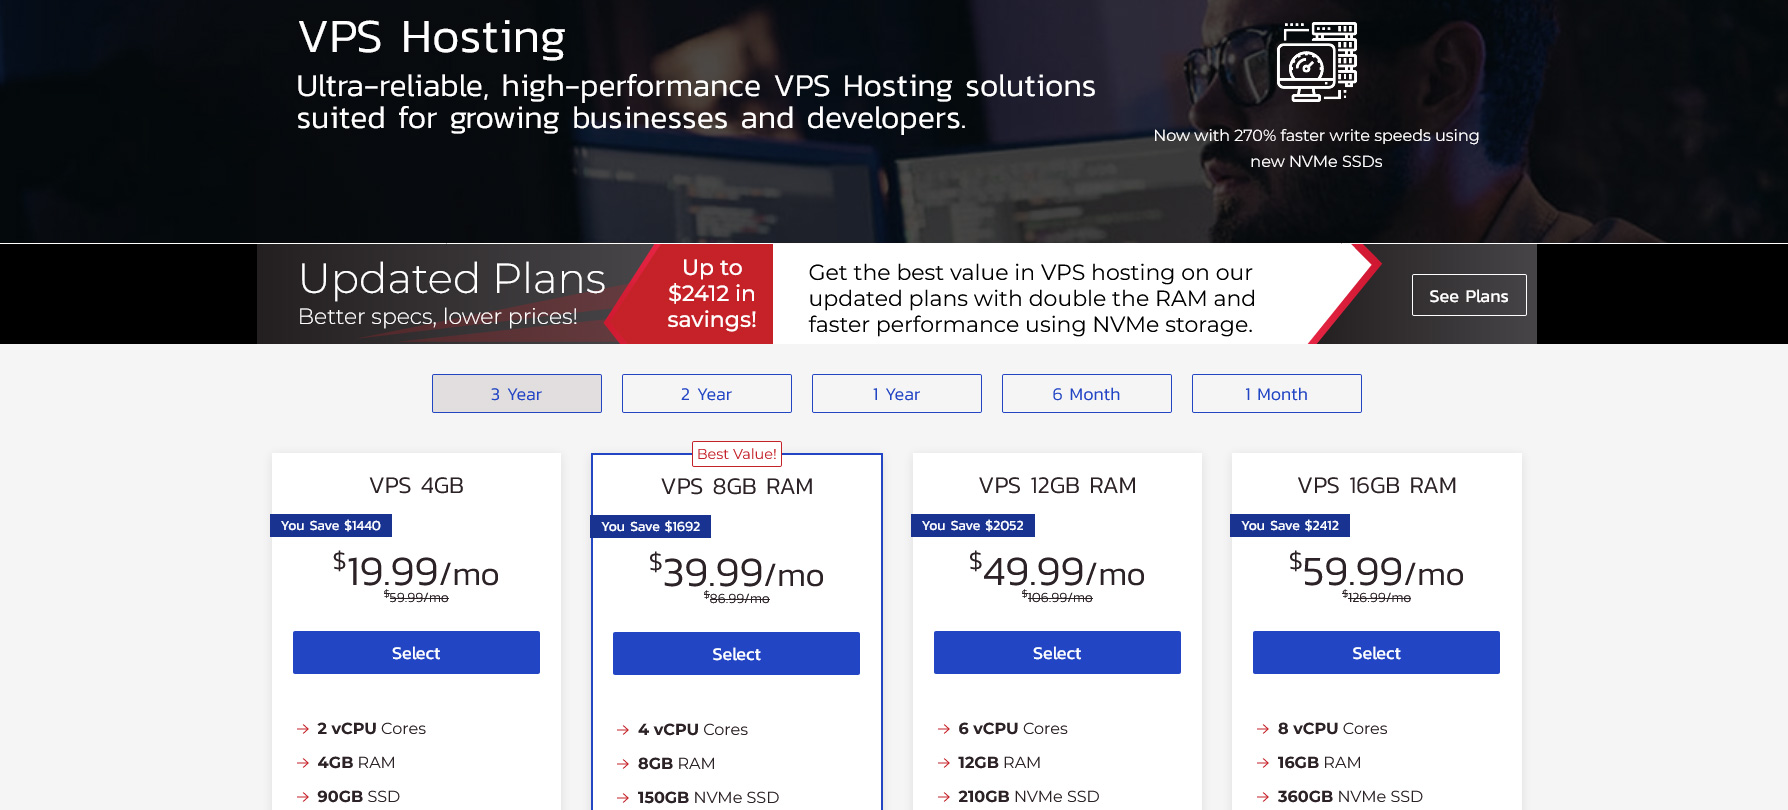 high performance vps hosting solutions